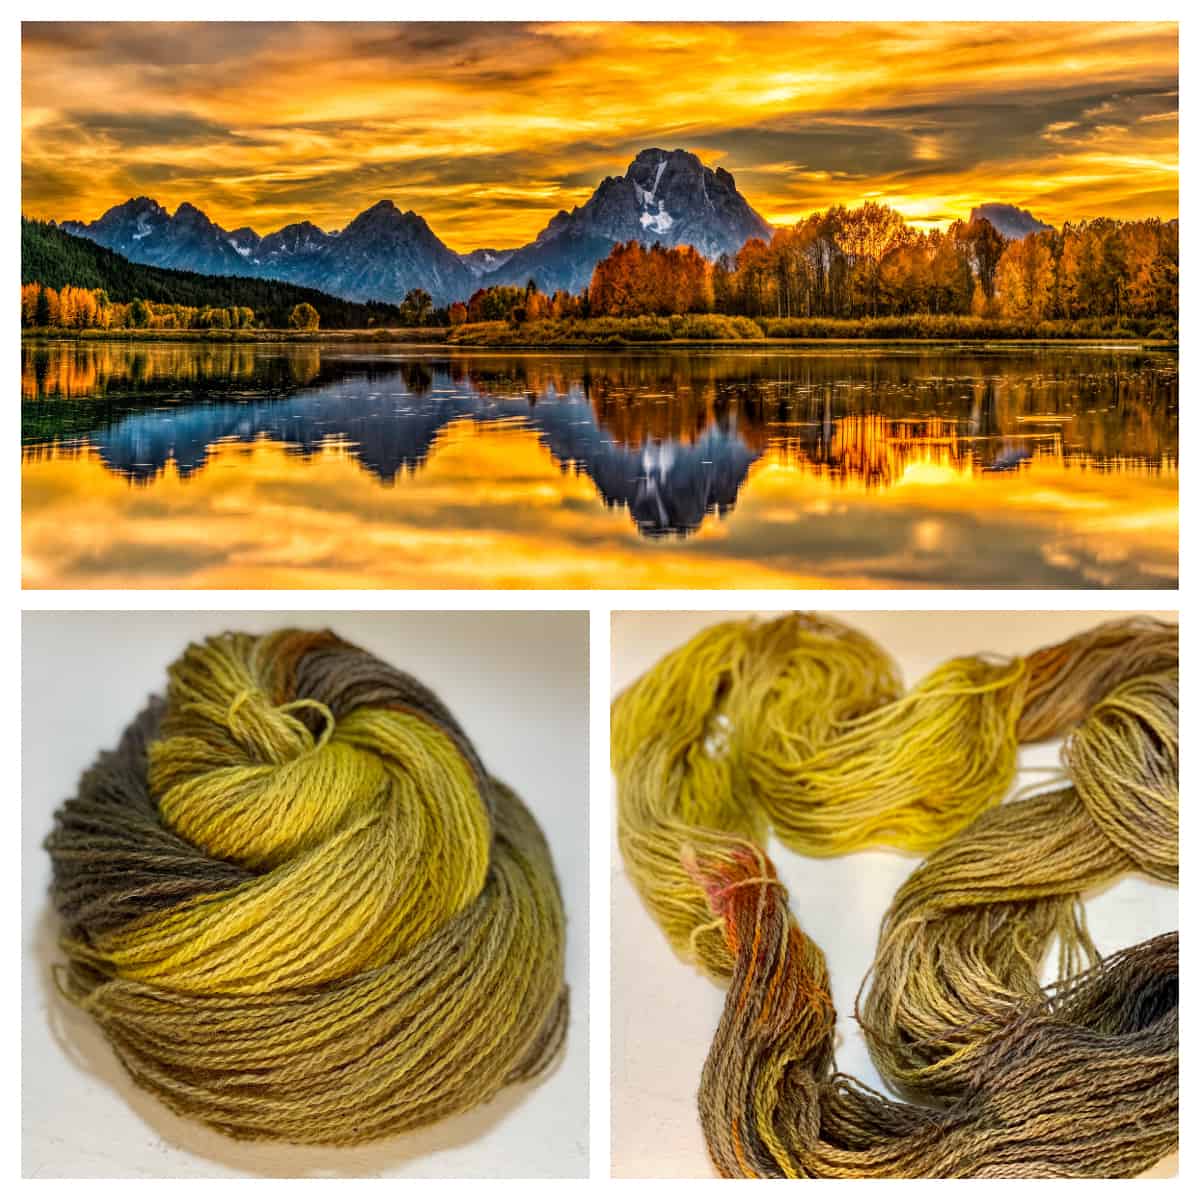 Yellow and orange foliage and a mountain reflected in a lake, with skeins of yarn in yellow, orange and gray.